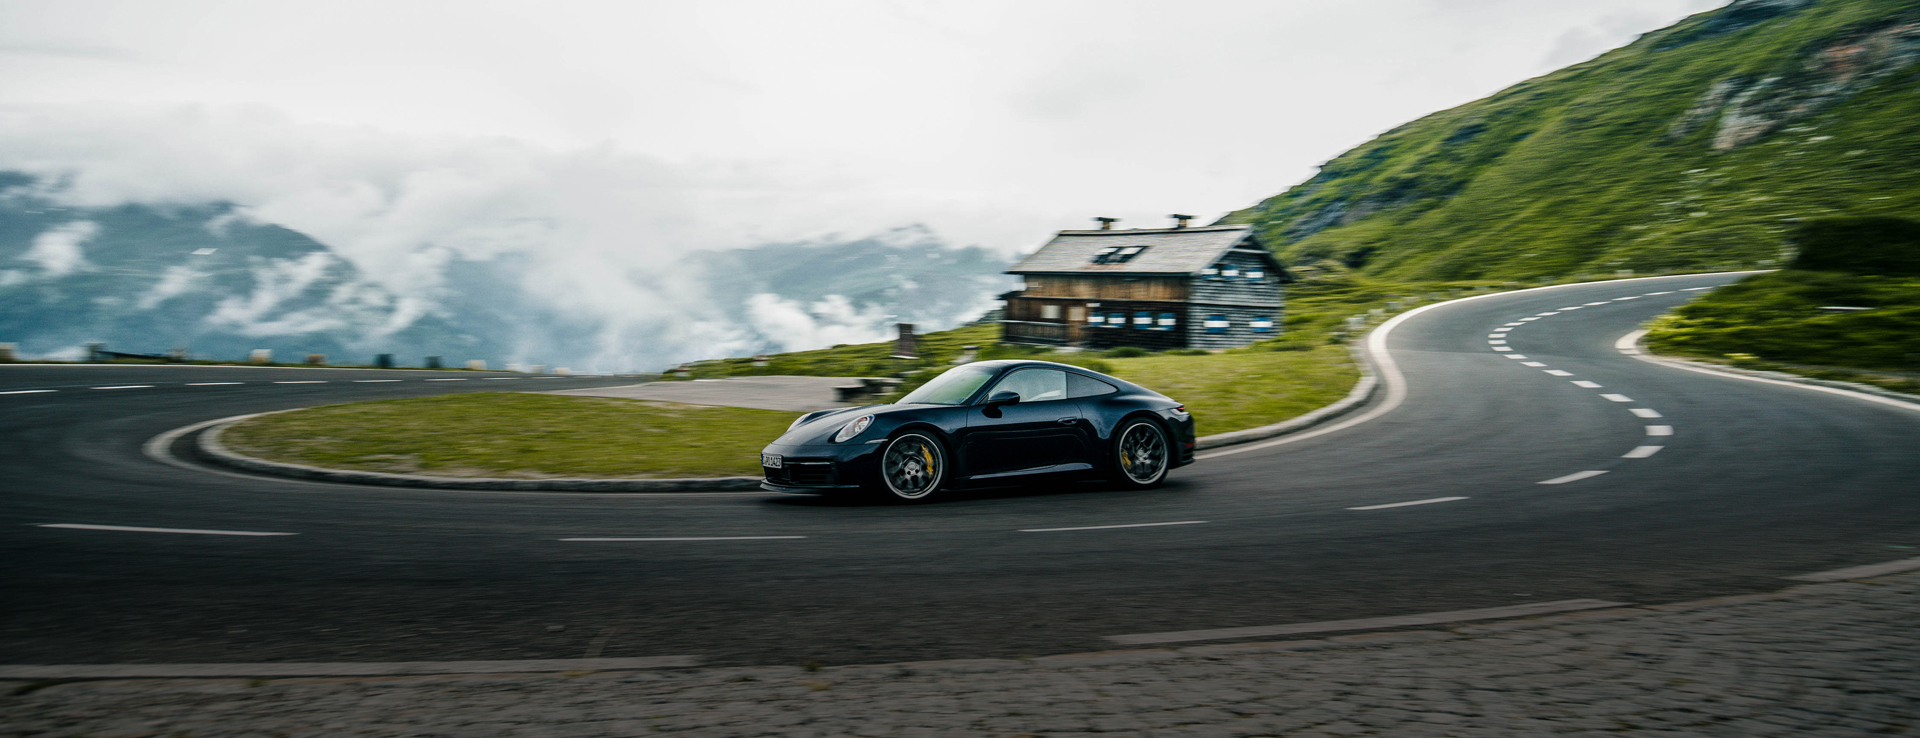 Black Porsche 911 on mountain switchback, on grey, cloudy day